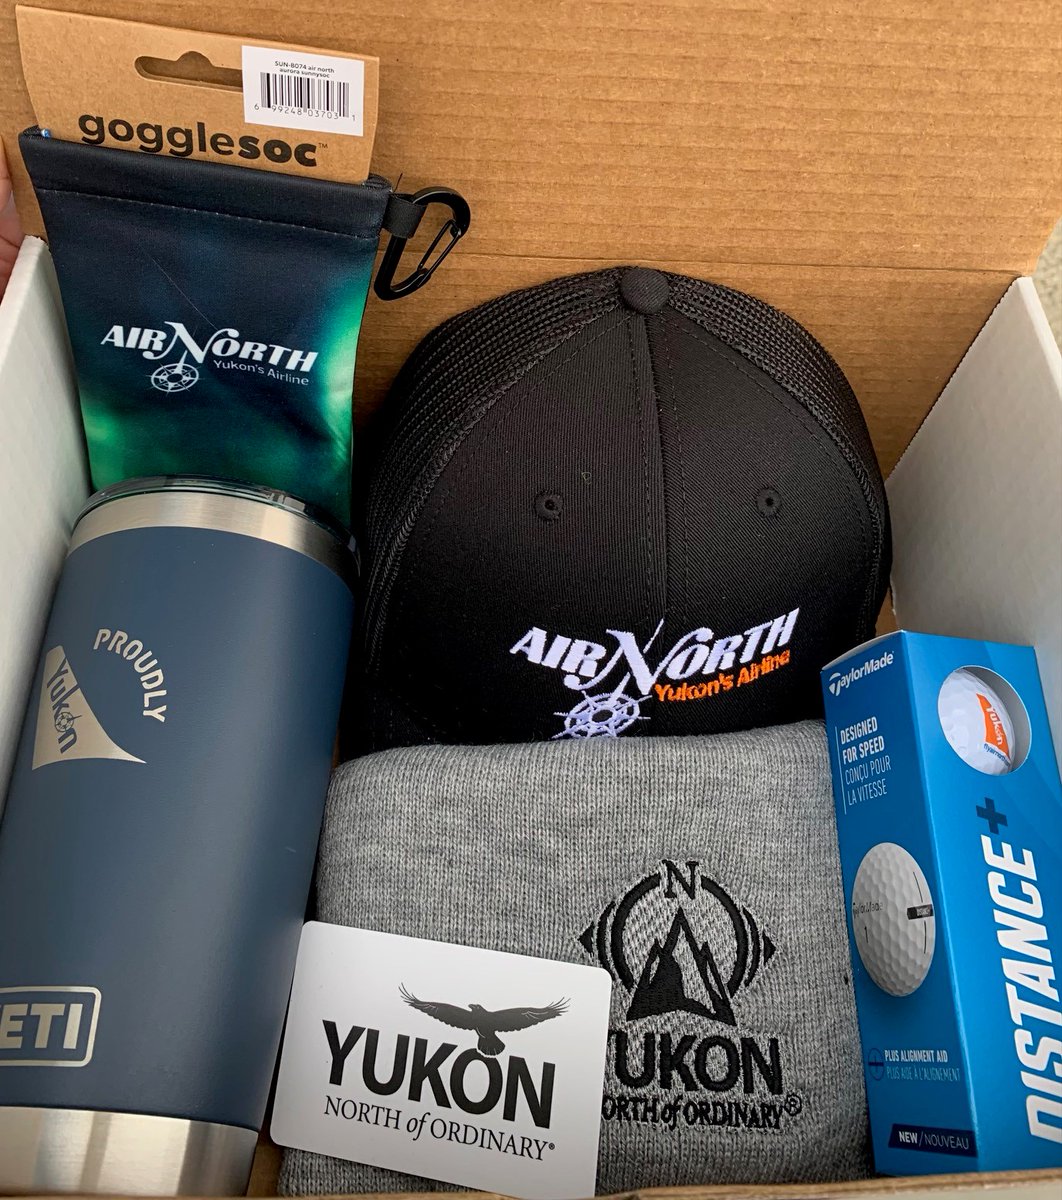 WE HAVE A WINNER! The sun may not have stuck around, but our resolve to thank Yukoners never wavered - congratulations to our winner, thank you to everyone for playing, and don't miss out on your last chance to save with our Yukoner Appreciation Sale! flyairnorth.com/yukoner-apprec…